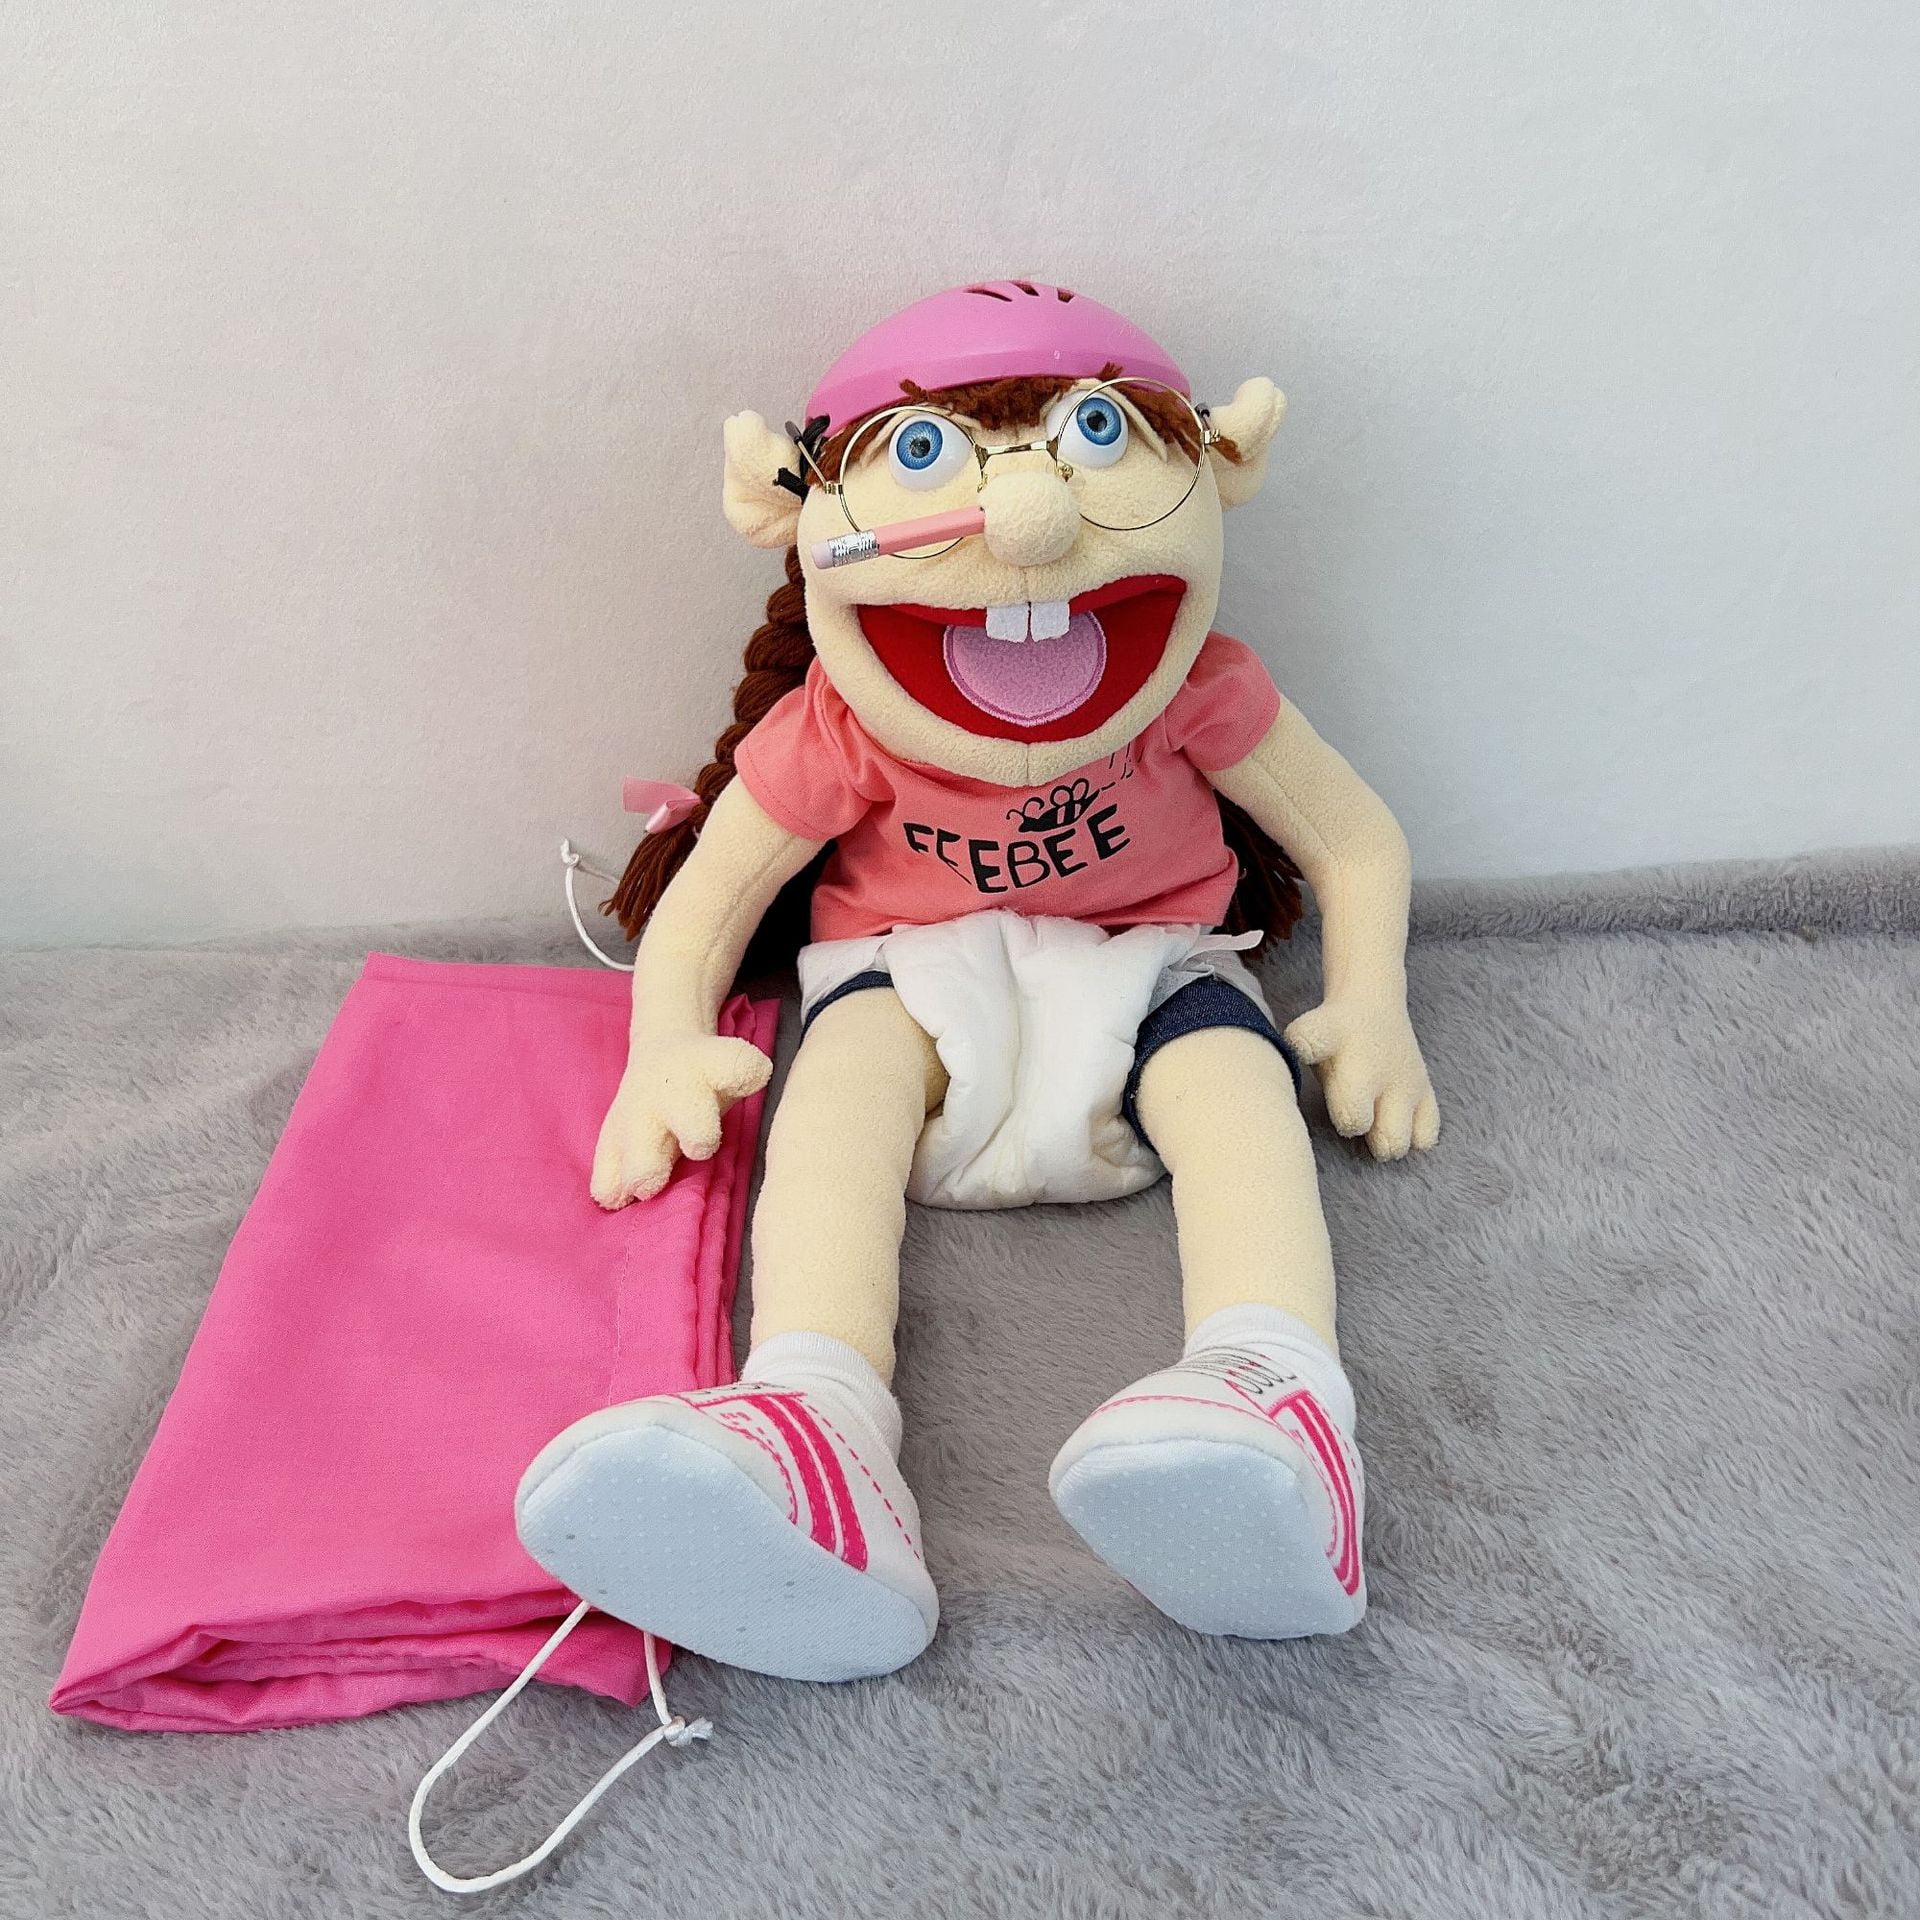 Jeffy Plush Puppet Toy, Fun Soft Prank Show Hand Puppet with Working Mouth(11)  